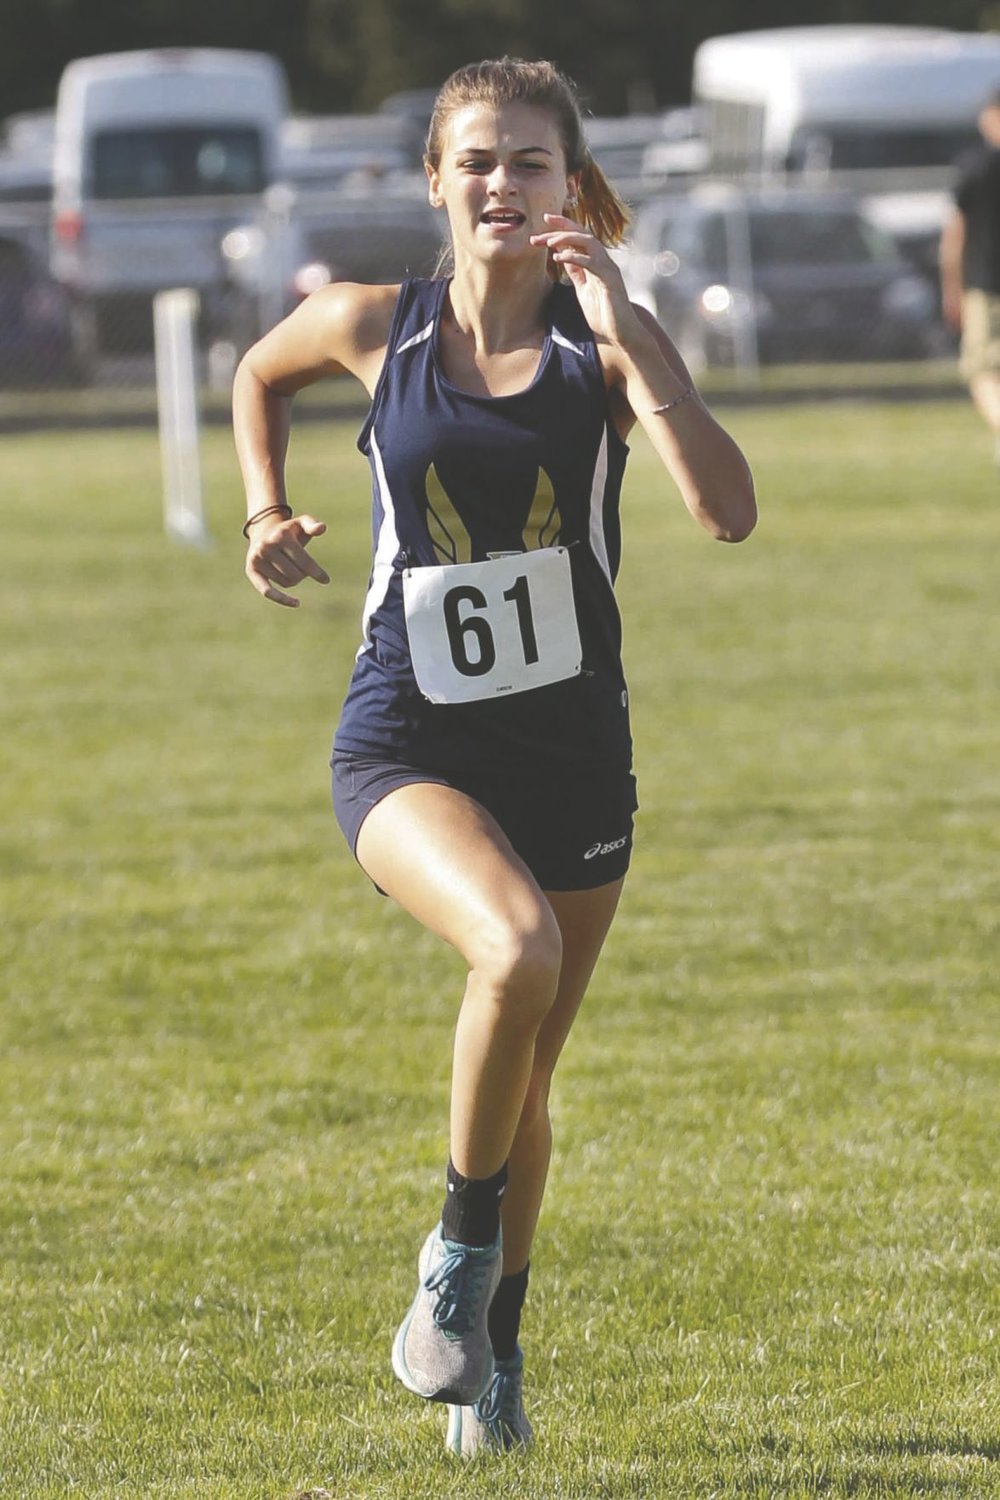 Kenna Bible, the top finisher for Fountain Central, was 32nd in a time of 25:50.